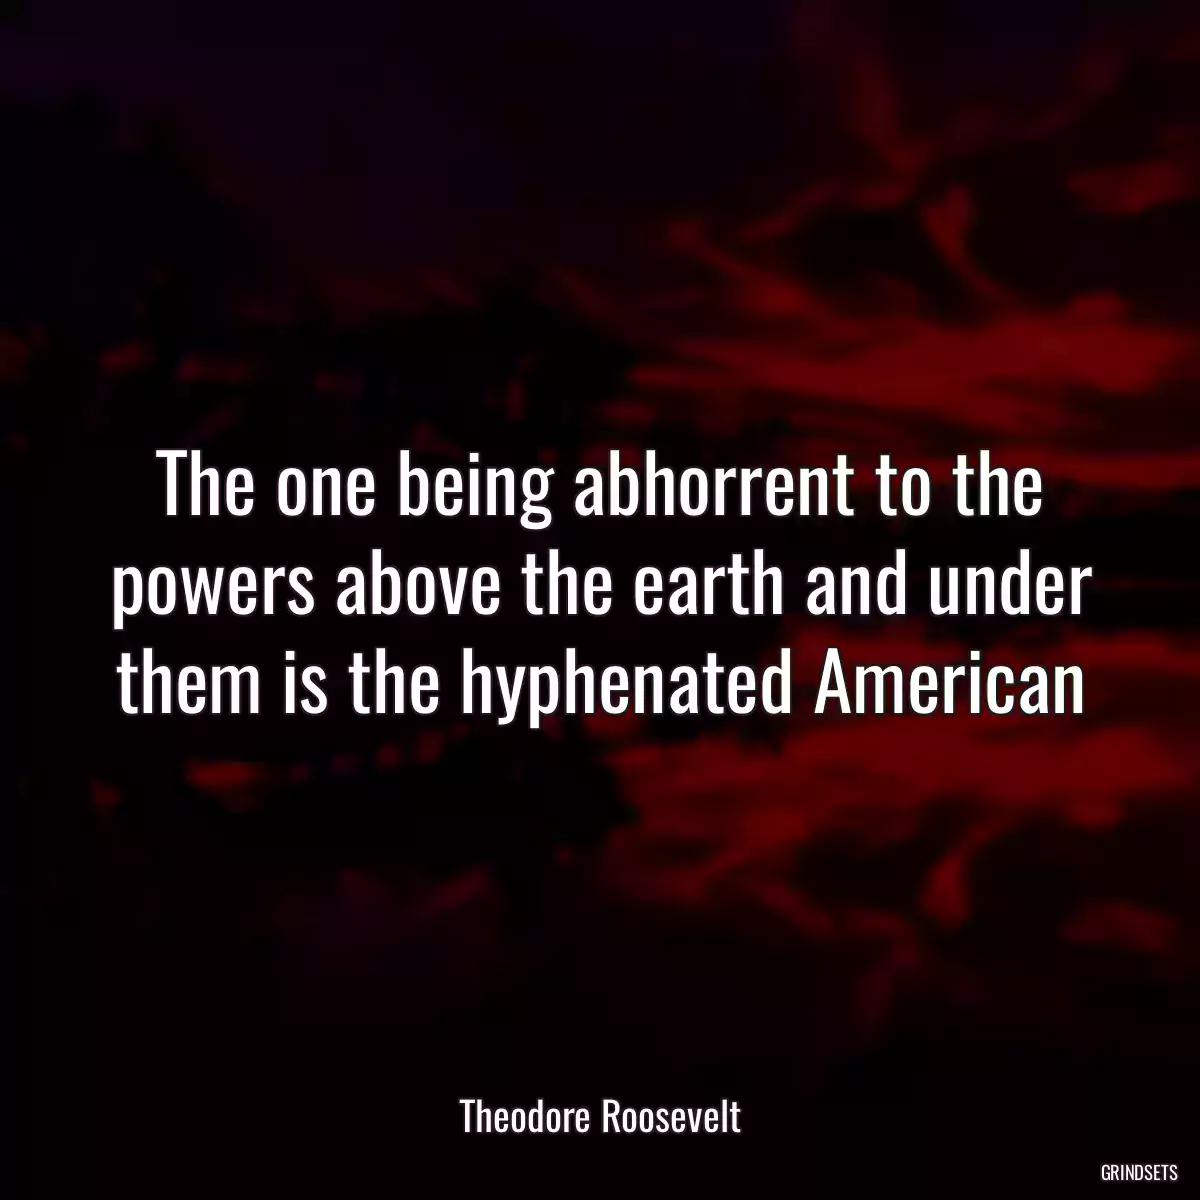 The one being abhorrent to the powers above the earth and under them is the hyphenated American